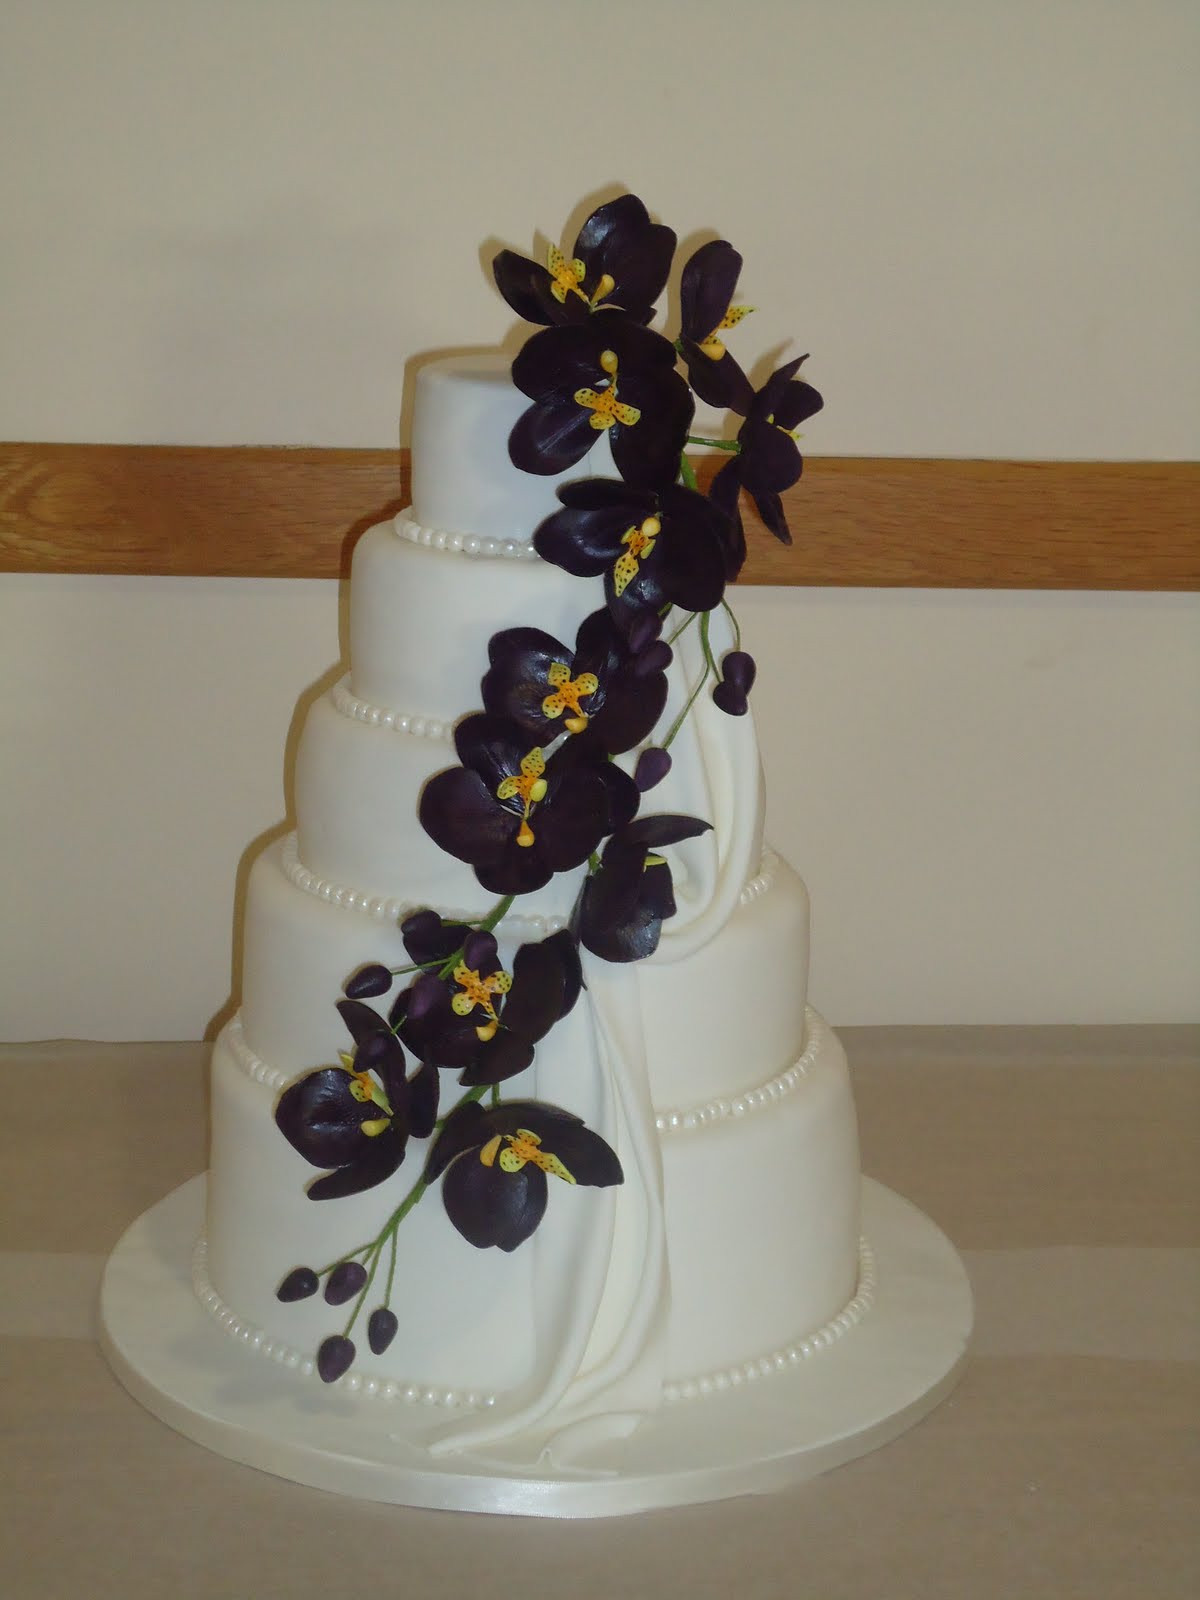 Wedding Cakes With Orchids
 The Lavender Cakes Orchid wedding cake